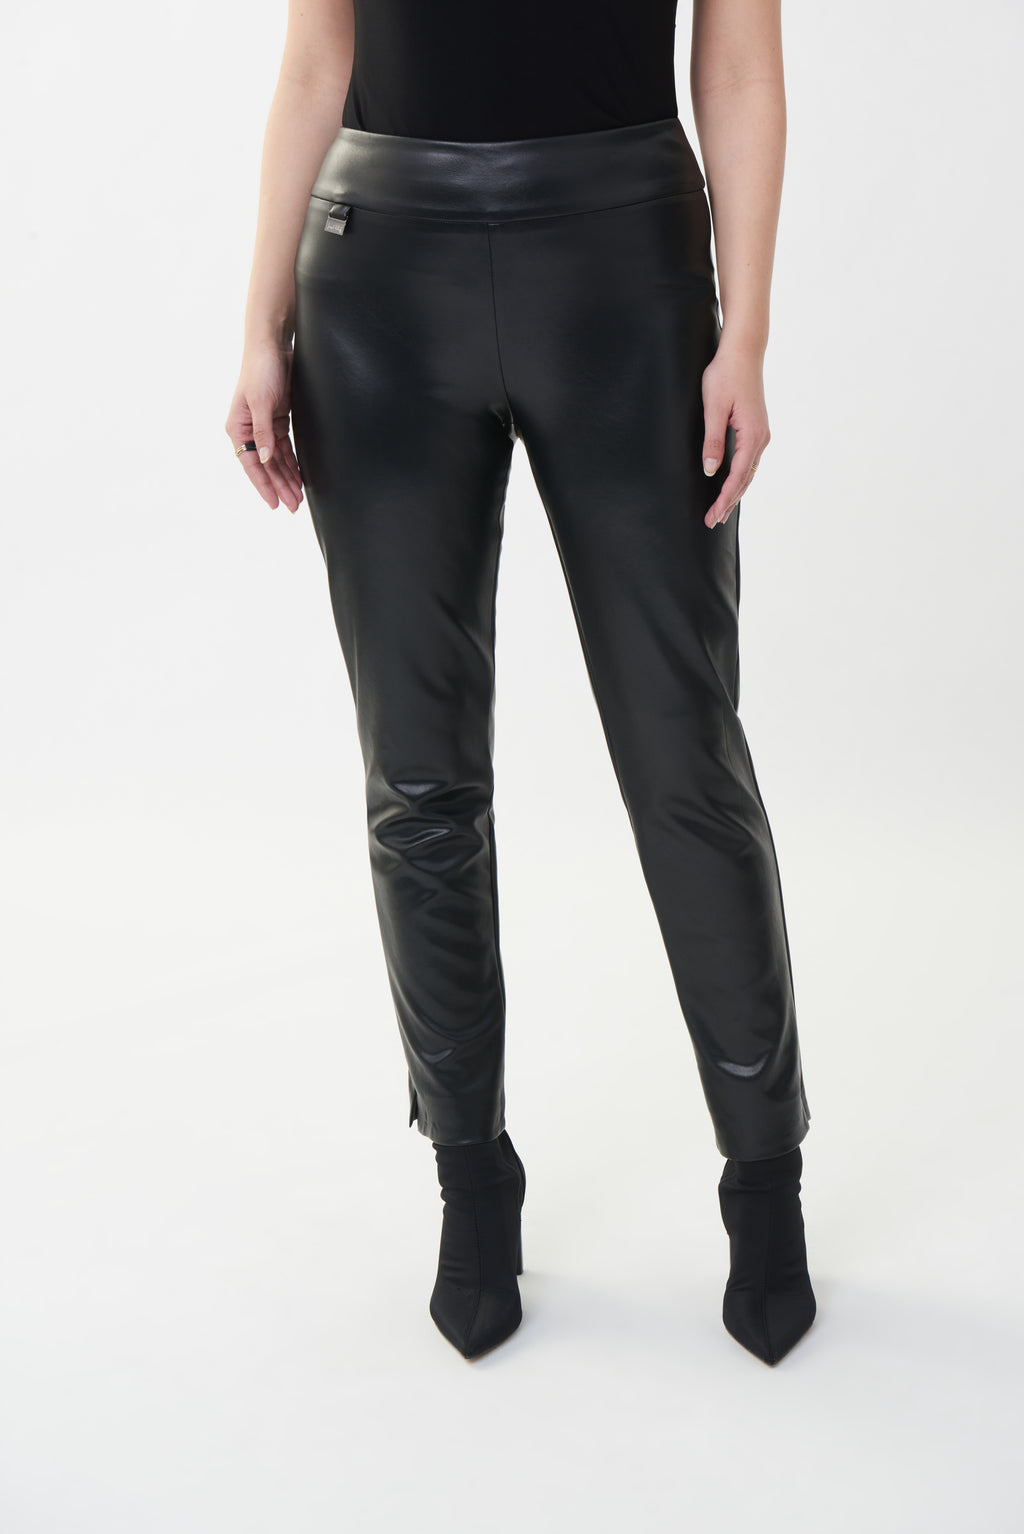 Joseph Ribkoff solid leatherette trousers are slim fit pull on trousers with a structured contour waistband and a beautiful Joseph Ribkoff tab ornament.